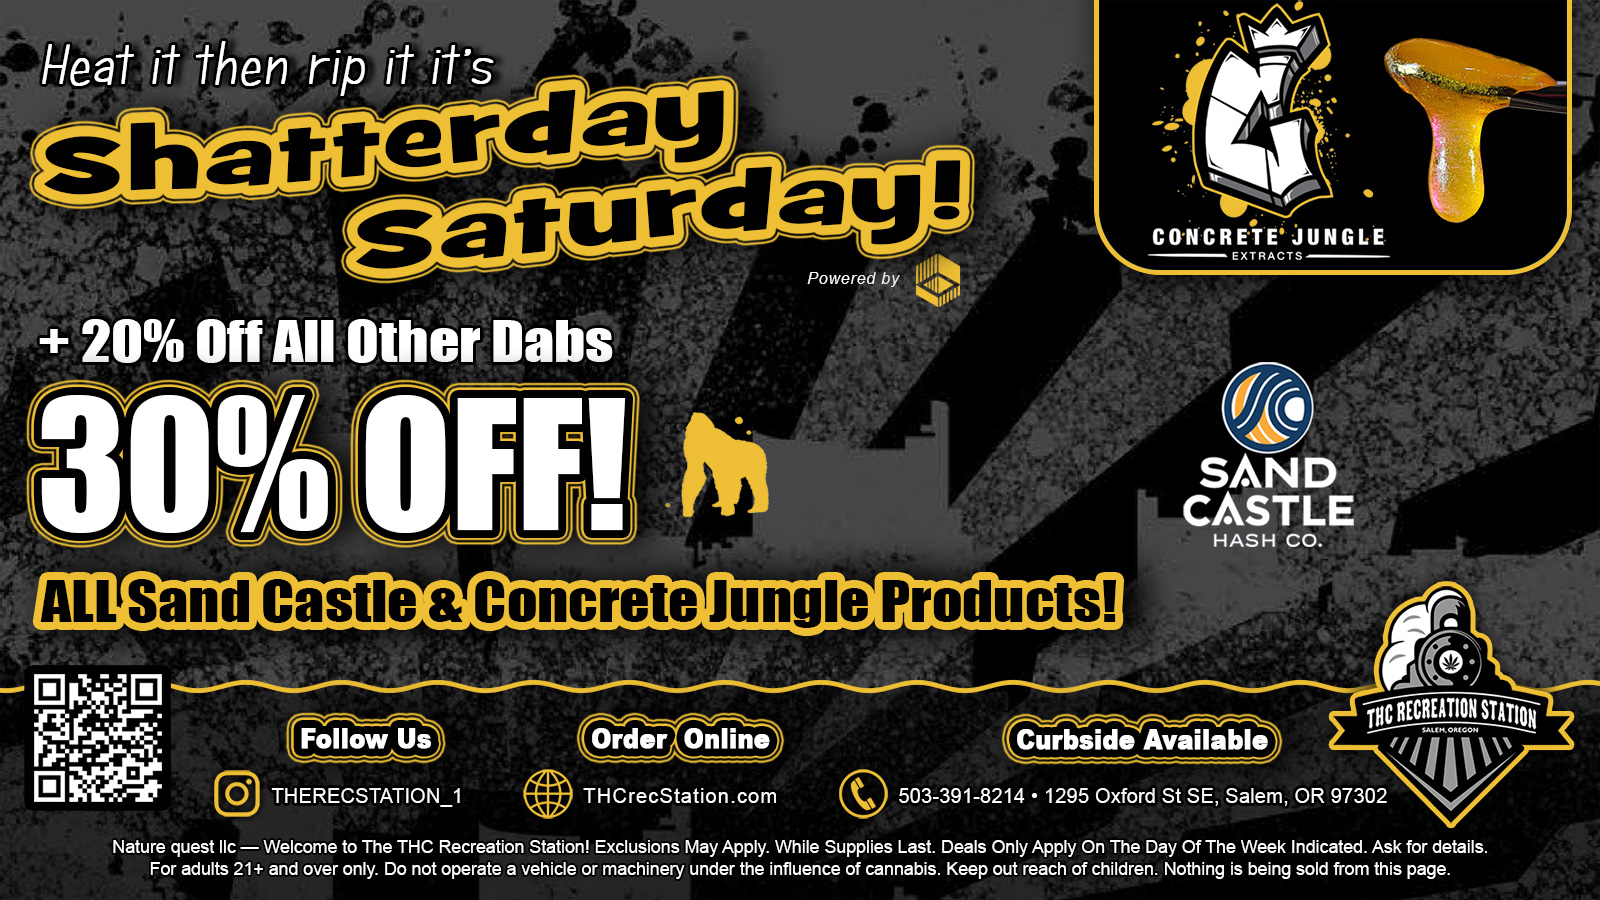 Shatterday Saturday By Concrete Jungle - Concrete Jungle Shatterday saves you 30% and gets you 3X stamps on all Concrete Jungle & Sand Castle Hash Co’s products. Also, get 20% off all our other dabs storewide!